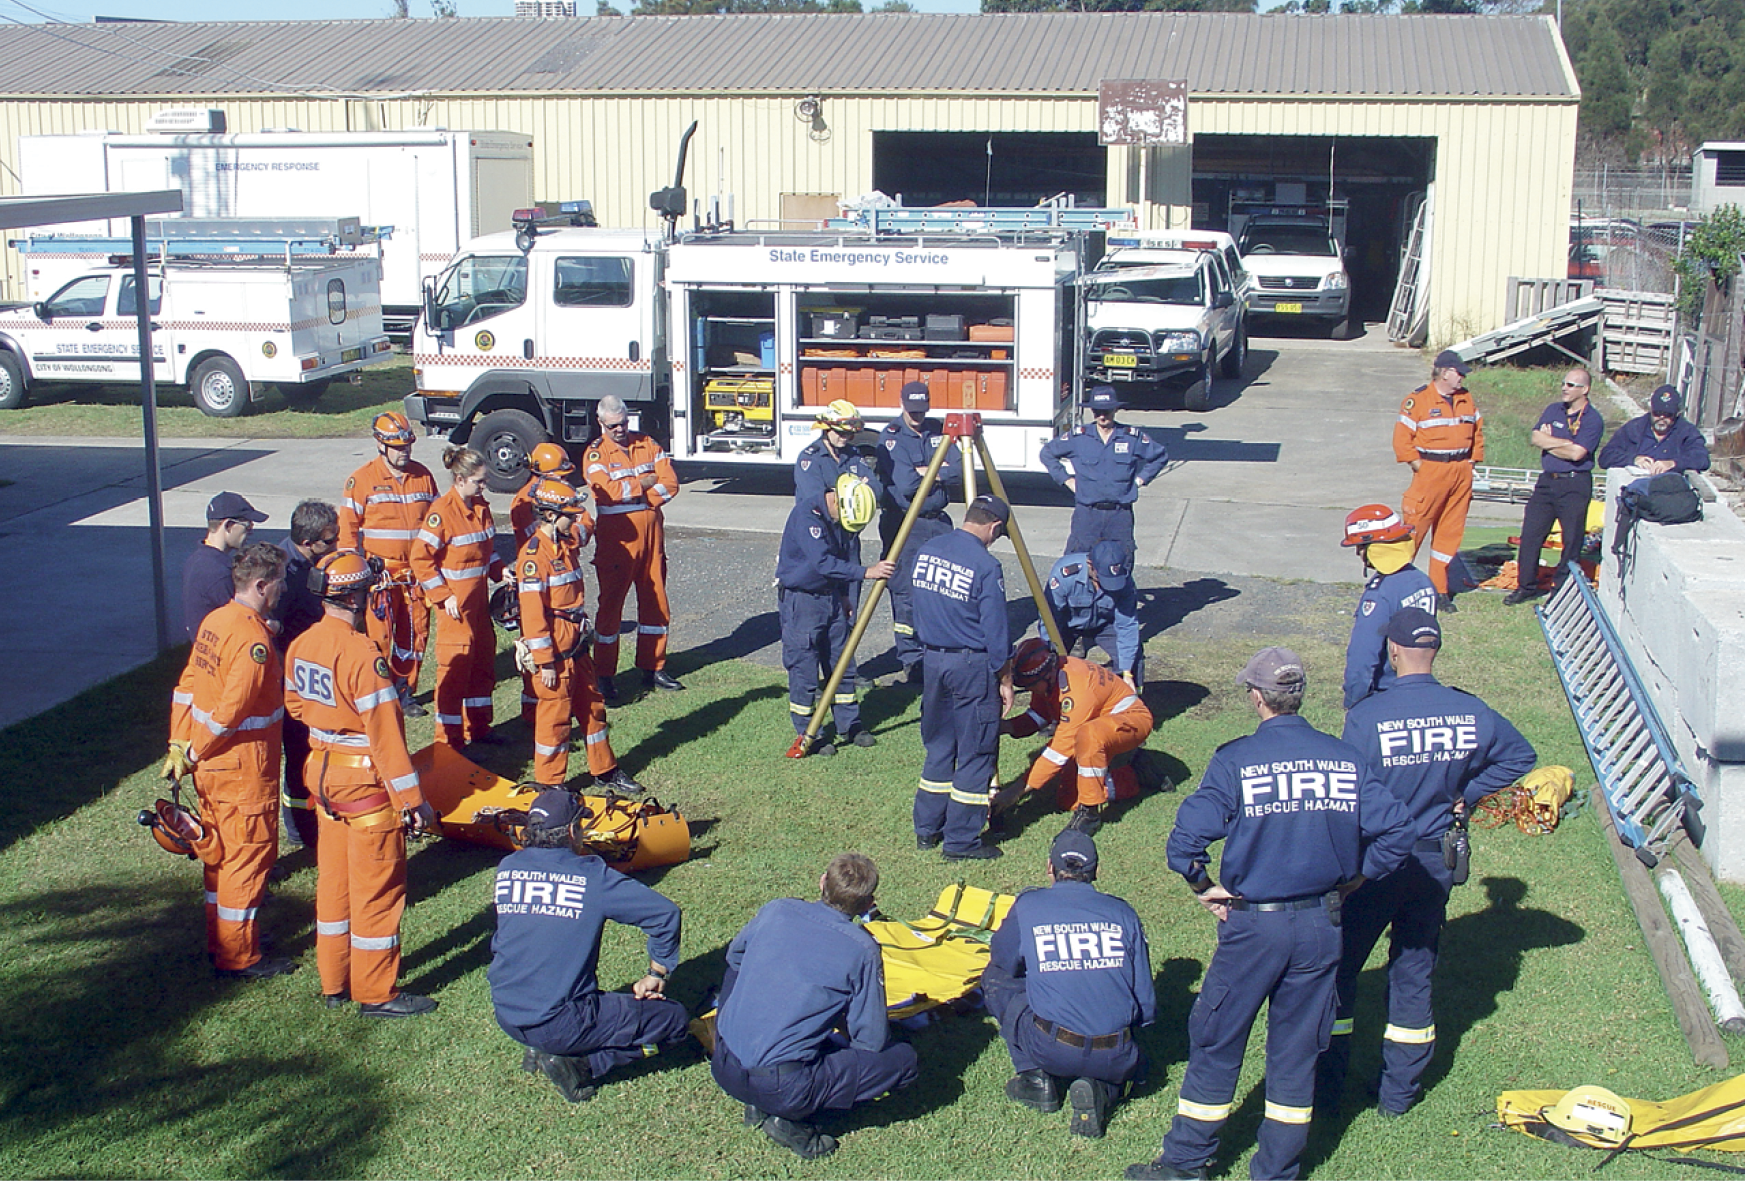 Photograph of emergency services staff in uniforms participating in an outdoor training exercise